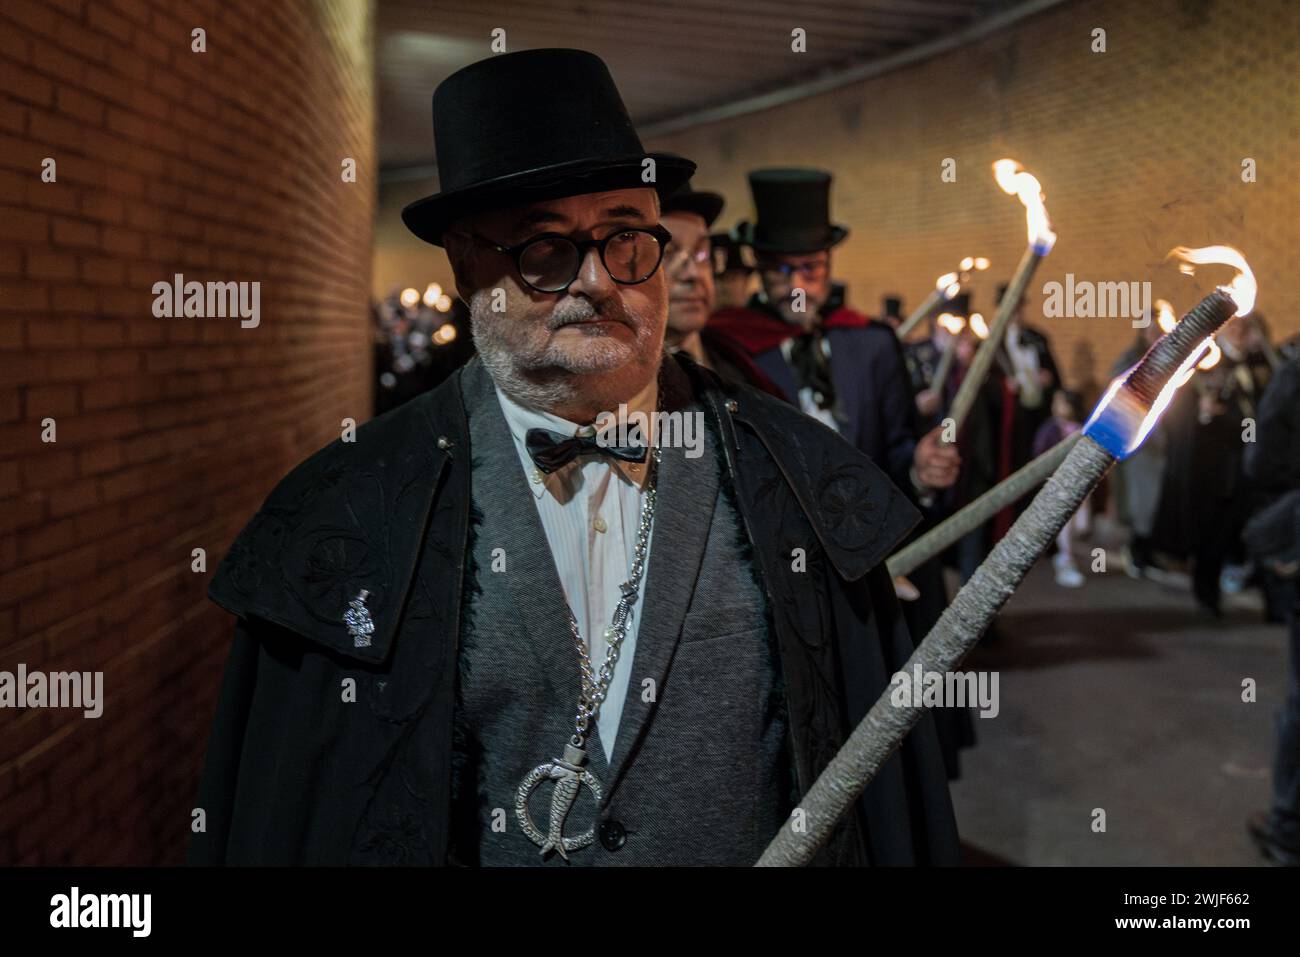 A member of the brotherhood of the sardine is seen carrying a torche lighting during the procession. The Sardine procession which takes place in Madrid, is a centuries-old Spanish tradition made famous by a painting of the Spanish artist Francisco de Goya called The Burial of the Sardine. It marks the end of Carnival celebrations and the beginning of Lent 40 days before Easter. It consists of a procession that parodies a funeral in which a symbolic figure of a sardine in its coffin is burned. The festivity takes place every Ash Wednesday and symbolizes the burial of the past and the rebirth of Stock Photo